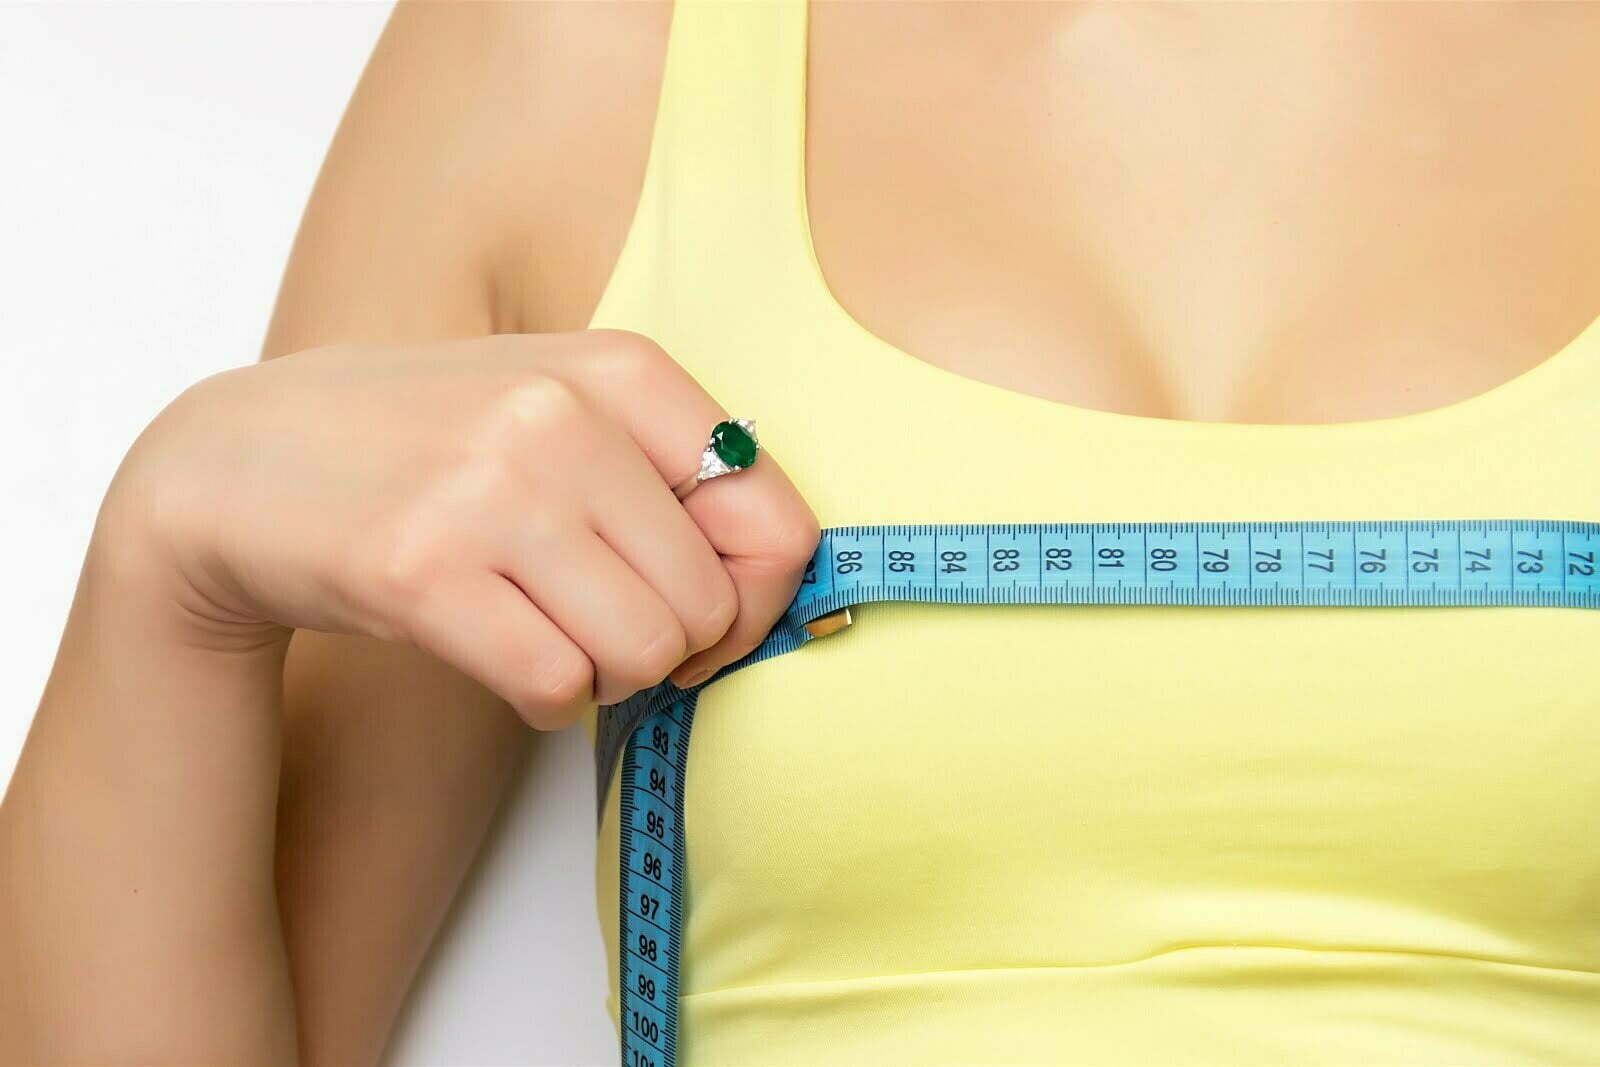 https://salamehplasticsurgery.com/wp-content/uploads/2022/11/How-Long-After-Breast-Reduction-Will-I-Know-My-Size-Salameh-Plastic-Surgery-Center.jpeg